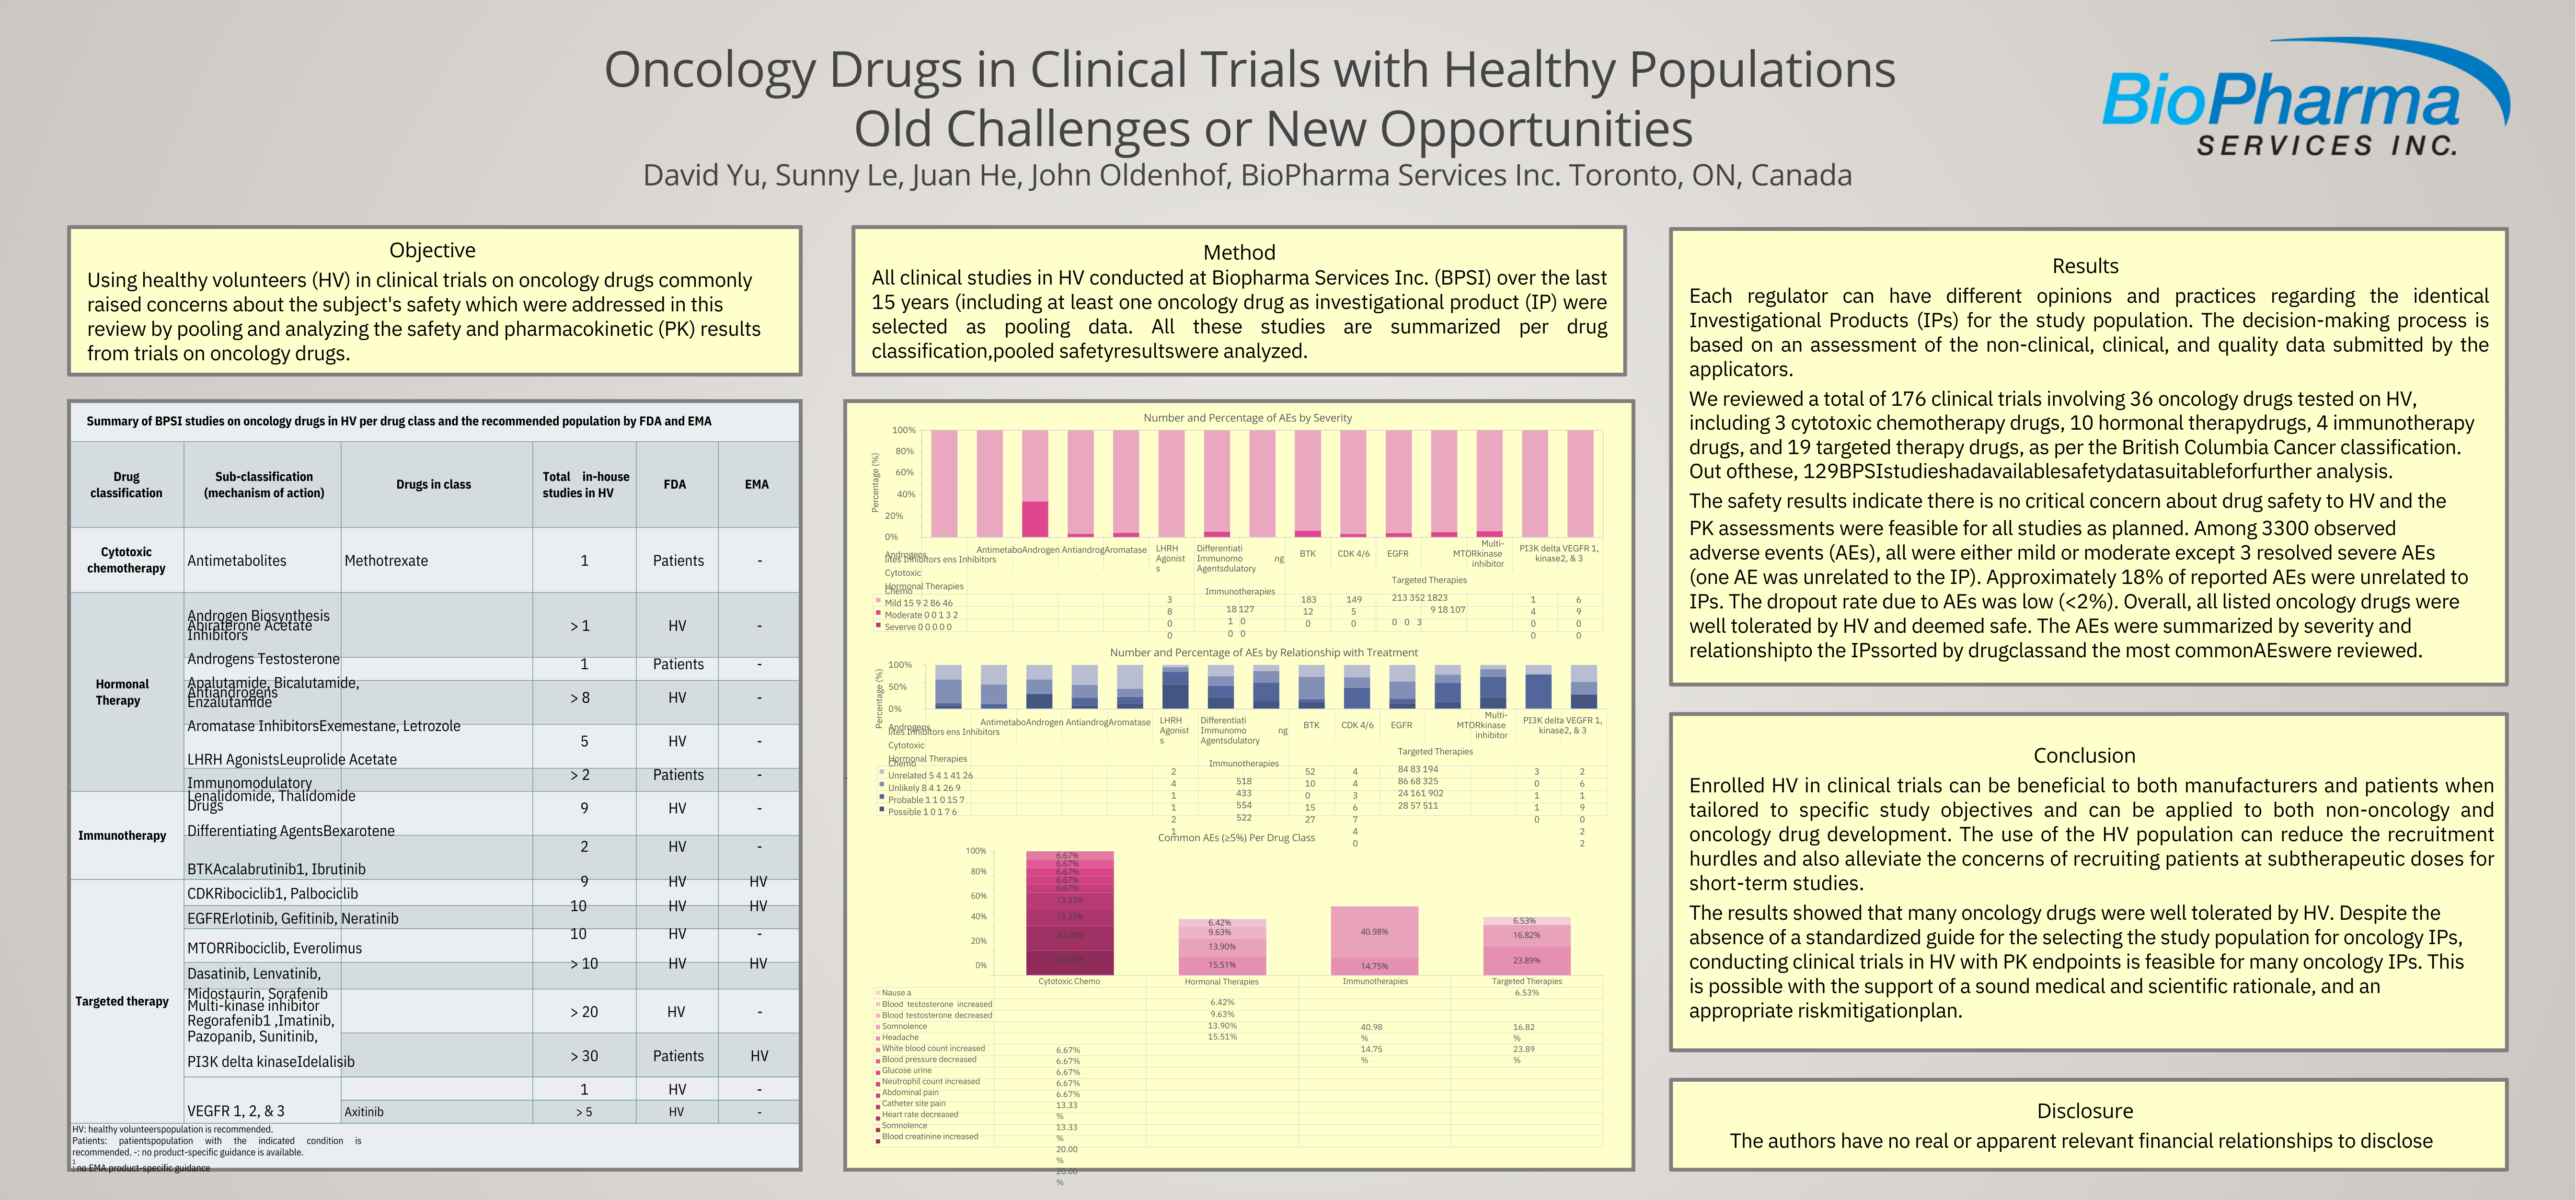 Oncology Drugs in Clinical Trials with Healthy Populations Hero Image.